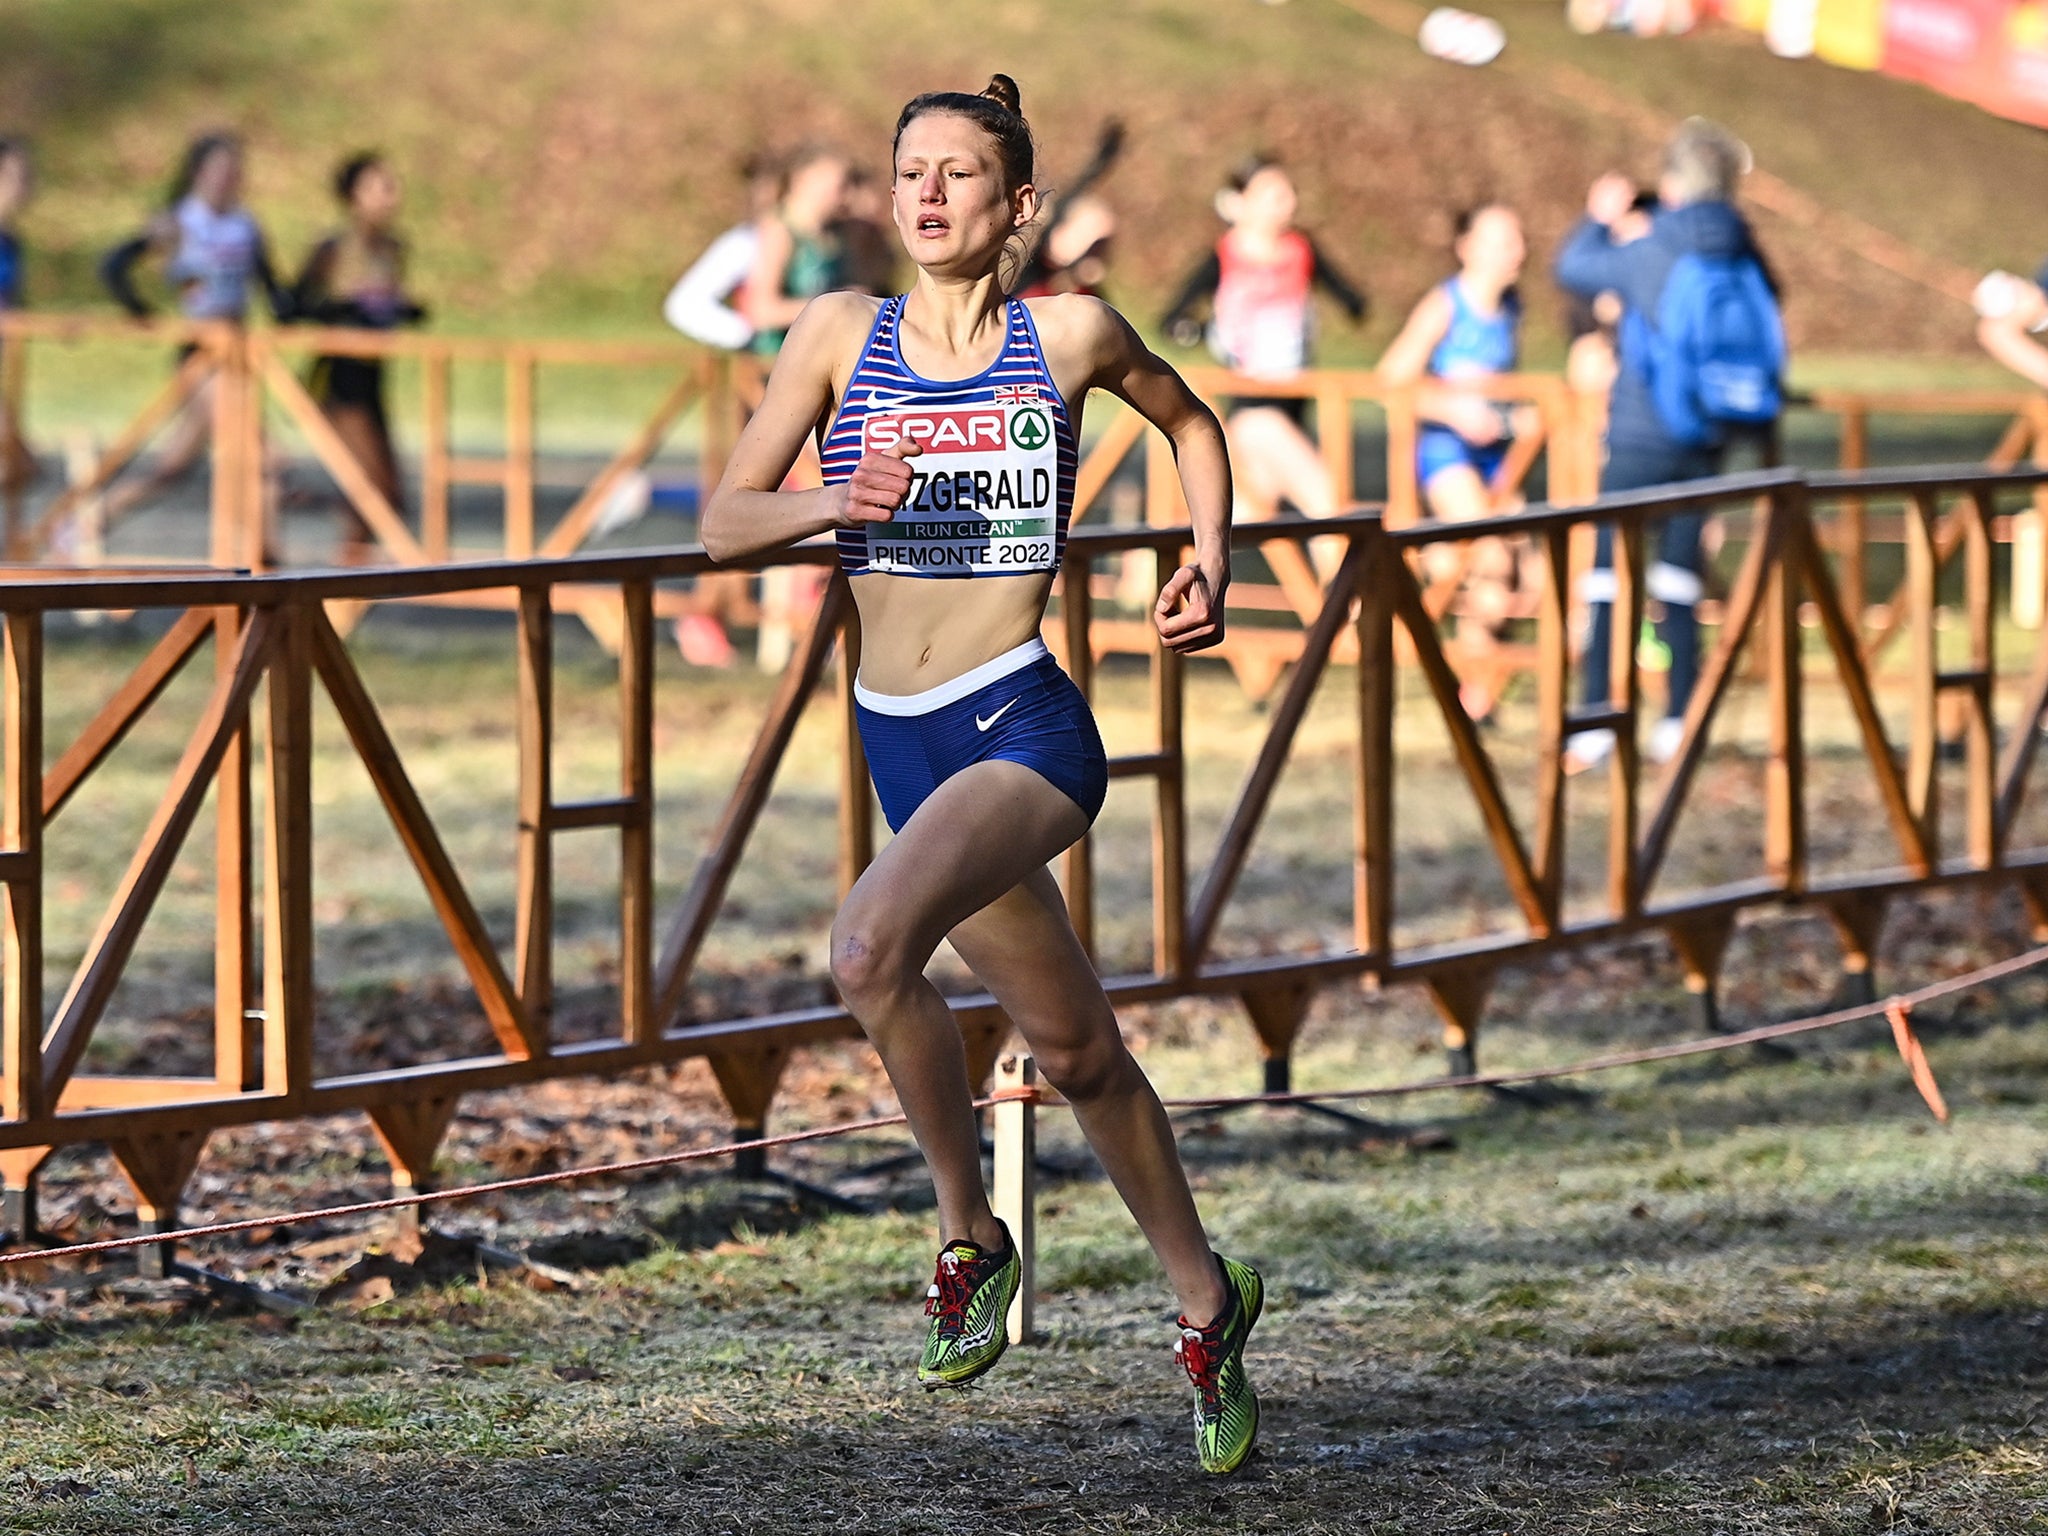 Innes Fitzgerald competing in the U20 women’s 4,000m in Turin, Italy